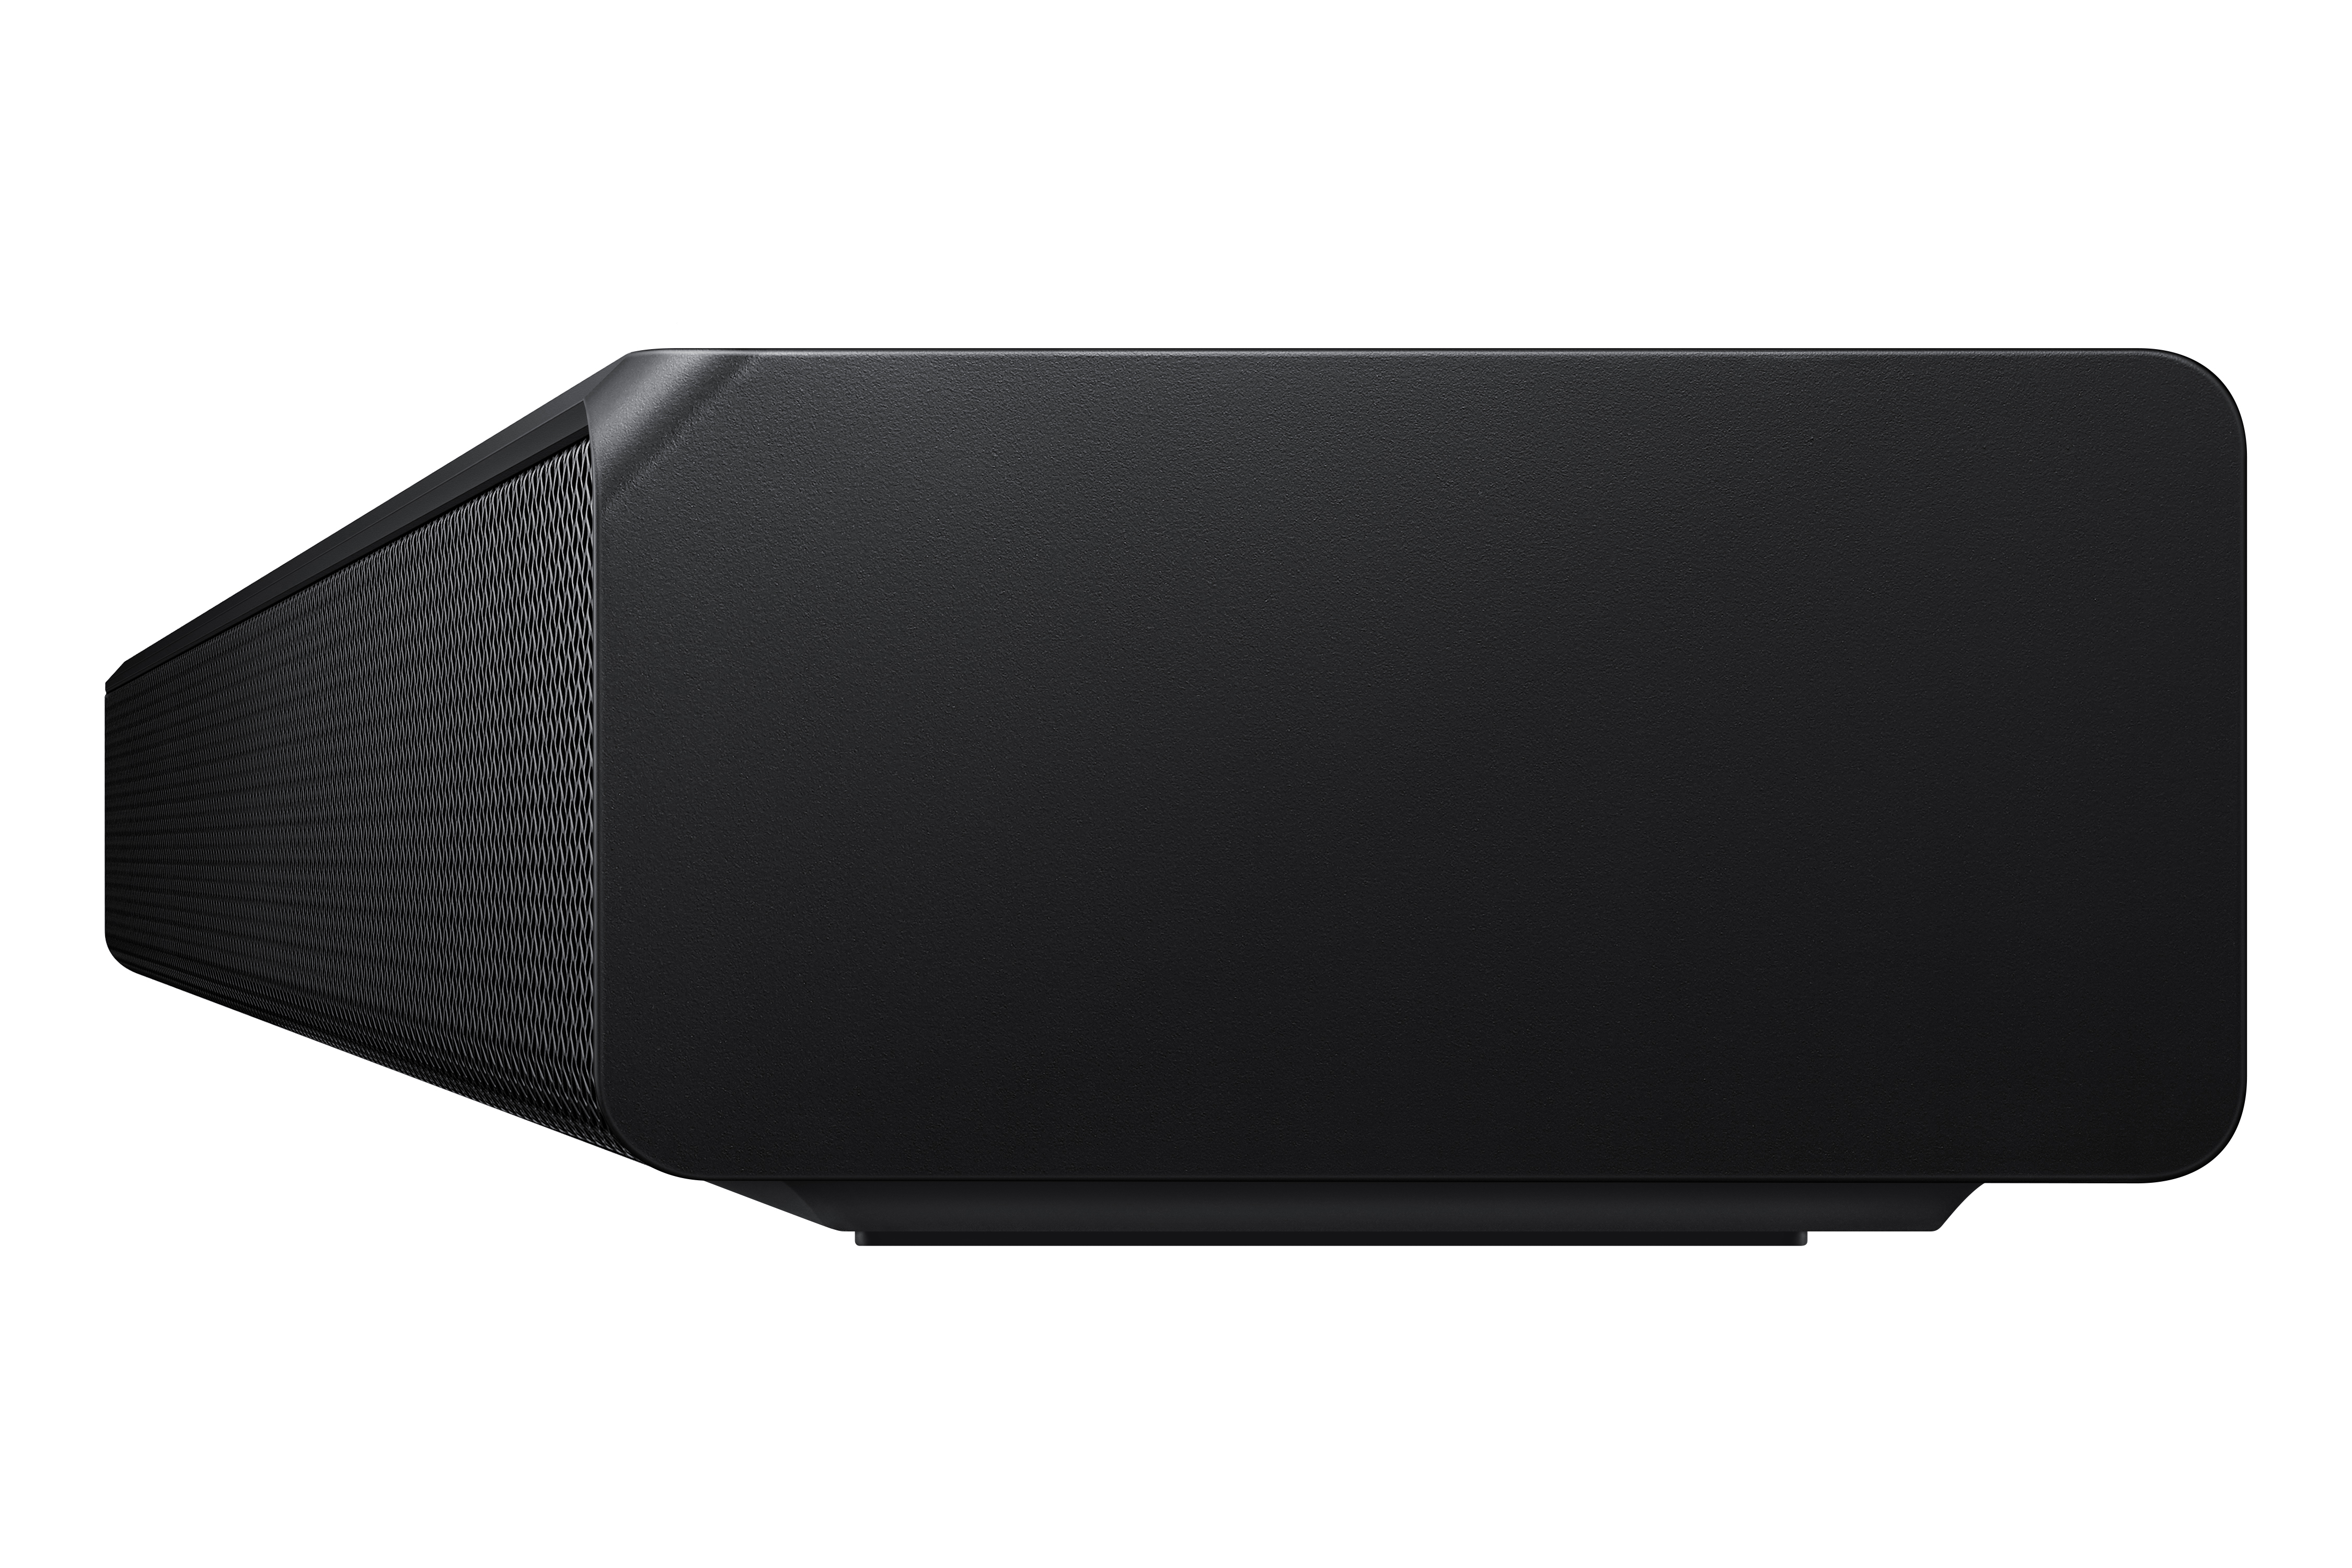 SAMSUNG HW-A650 3.1 Channel Soundbar with Wireless Subwoofer and Dolby 5.1 / DTS Virtual:X - image 5 of 8